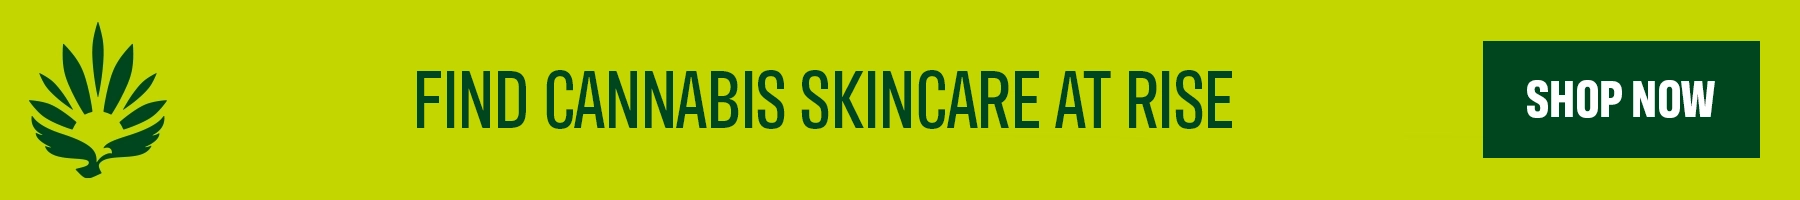 Find Cannabis Skincare at RISE